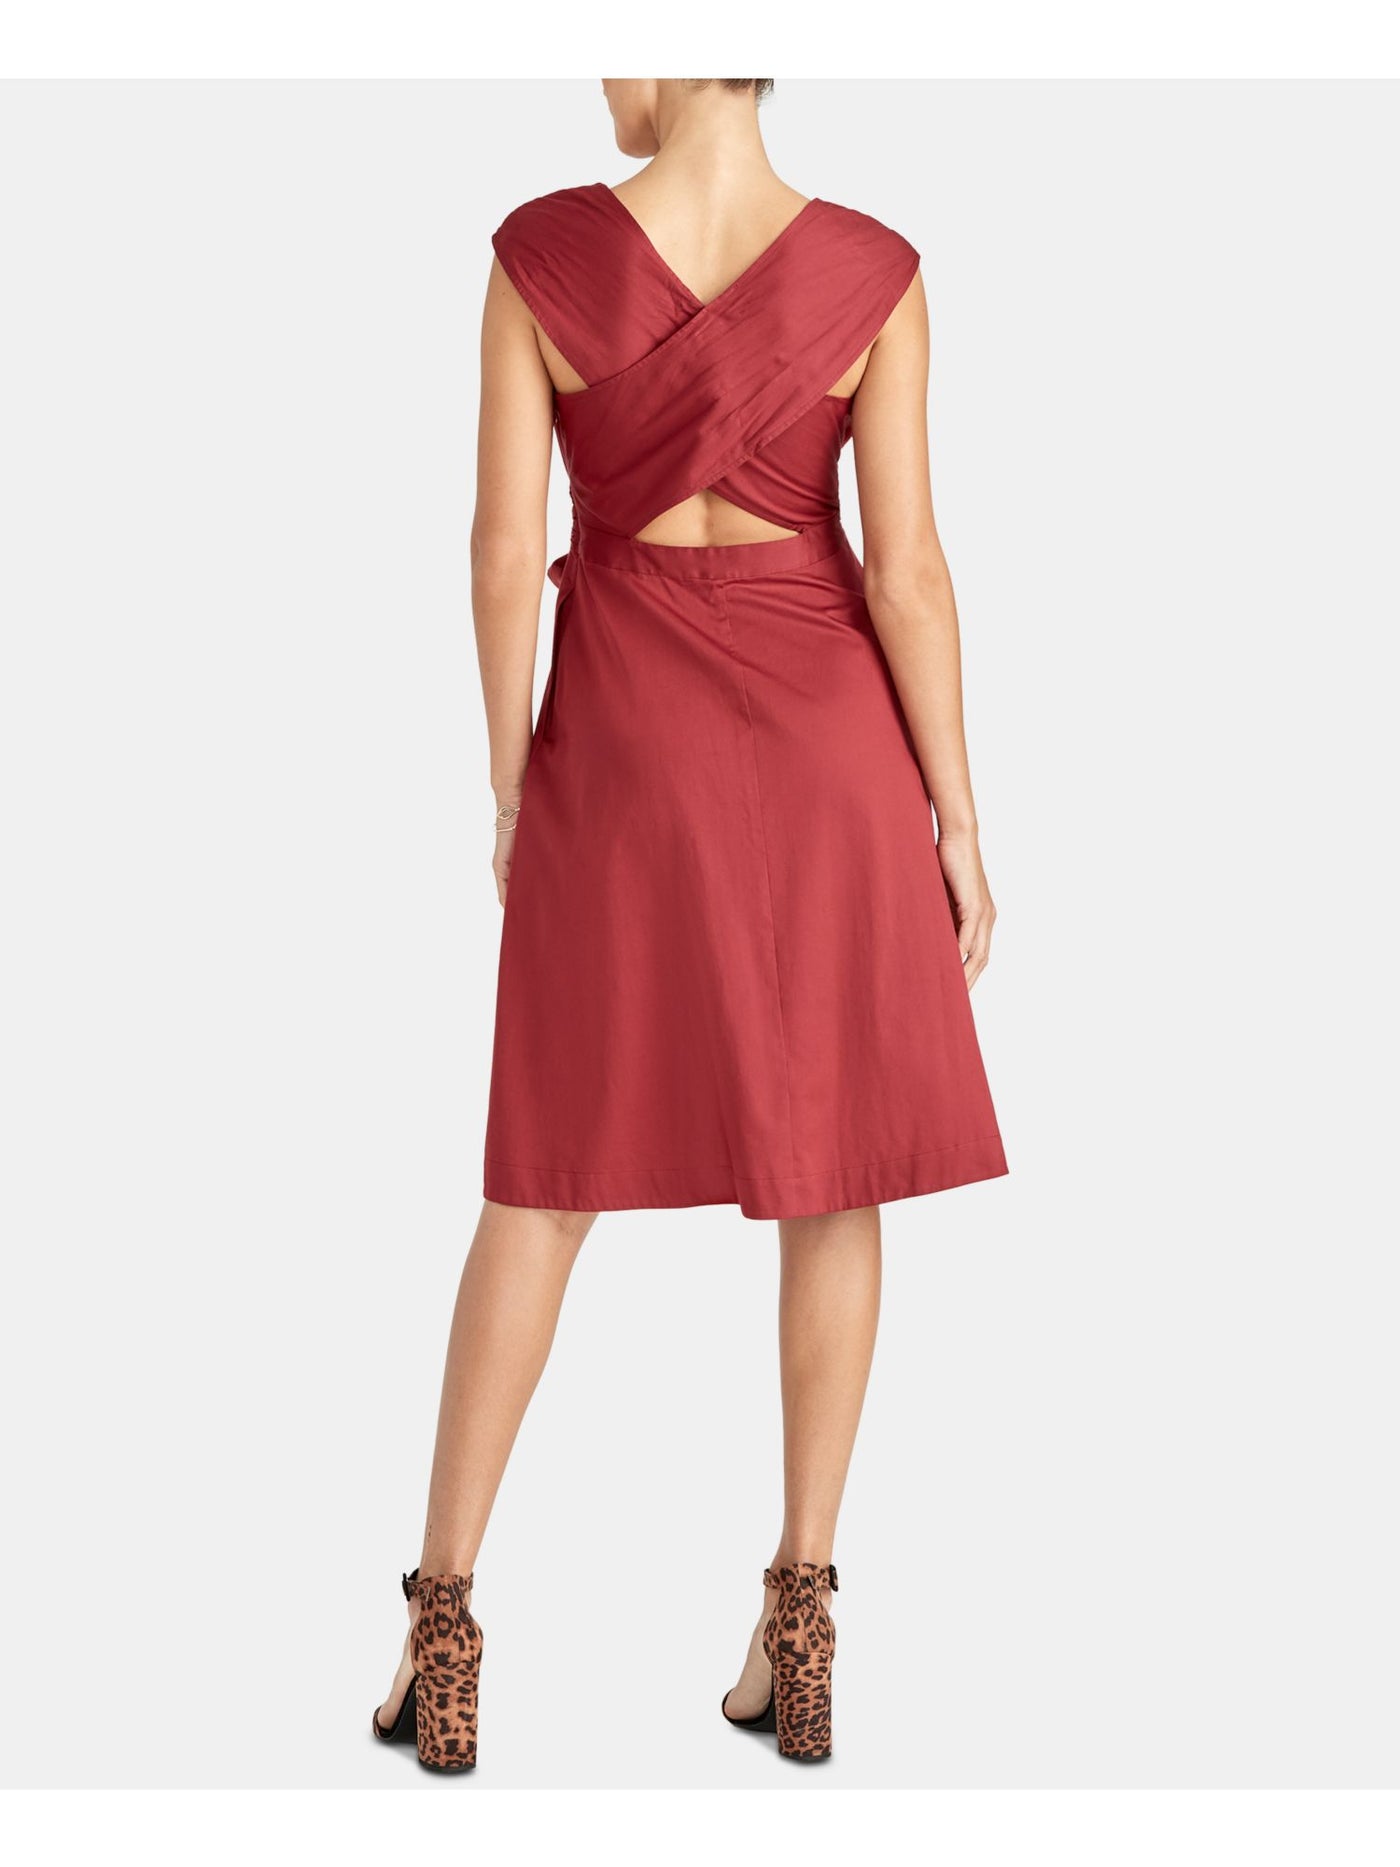 RACHEL ROY Womens Red Belted Sleeveless V Neck Knee Length Wear To Work Fit + Flare Dress 6